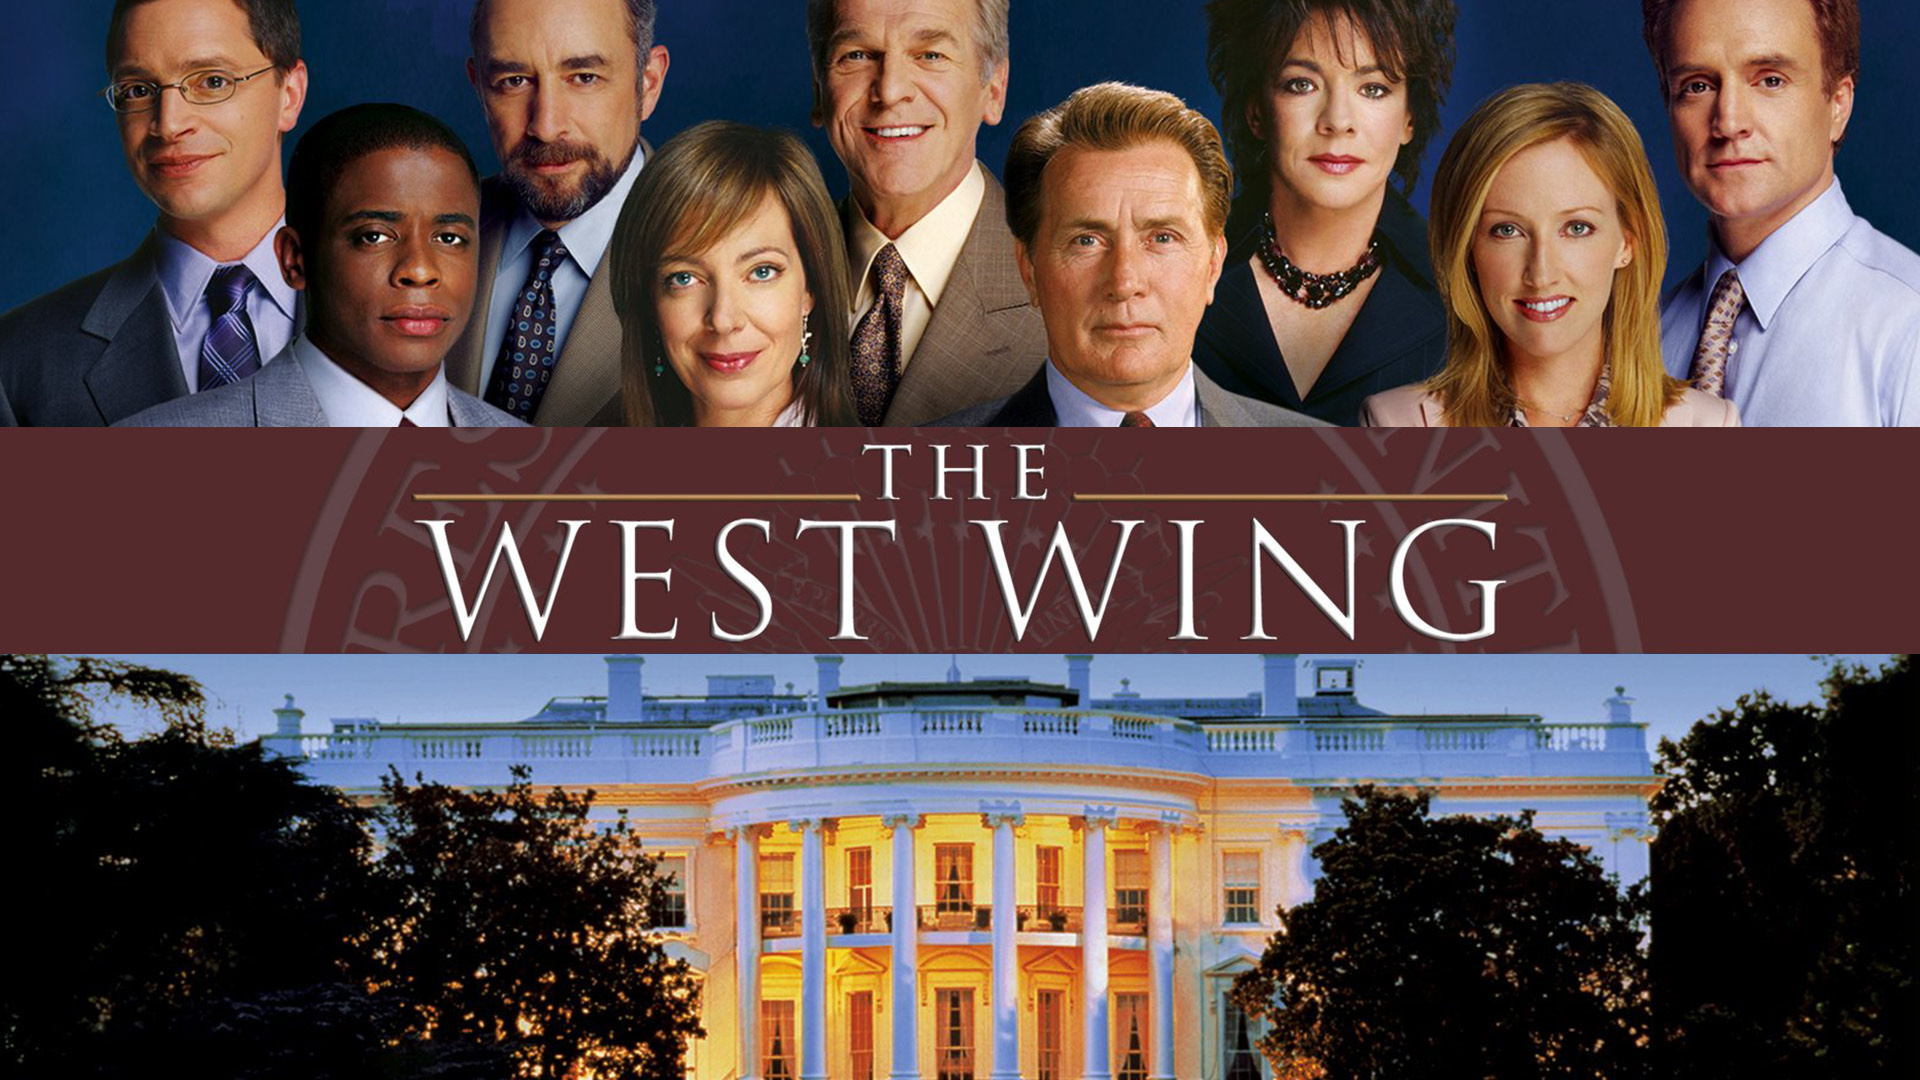 The West Wing (TV Series): The season 5 poster with the main cast, Martin Sheen, John Spencer, Richard Schiff. 1920x1080 Full HD Wallpaper.